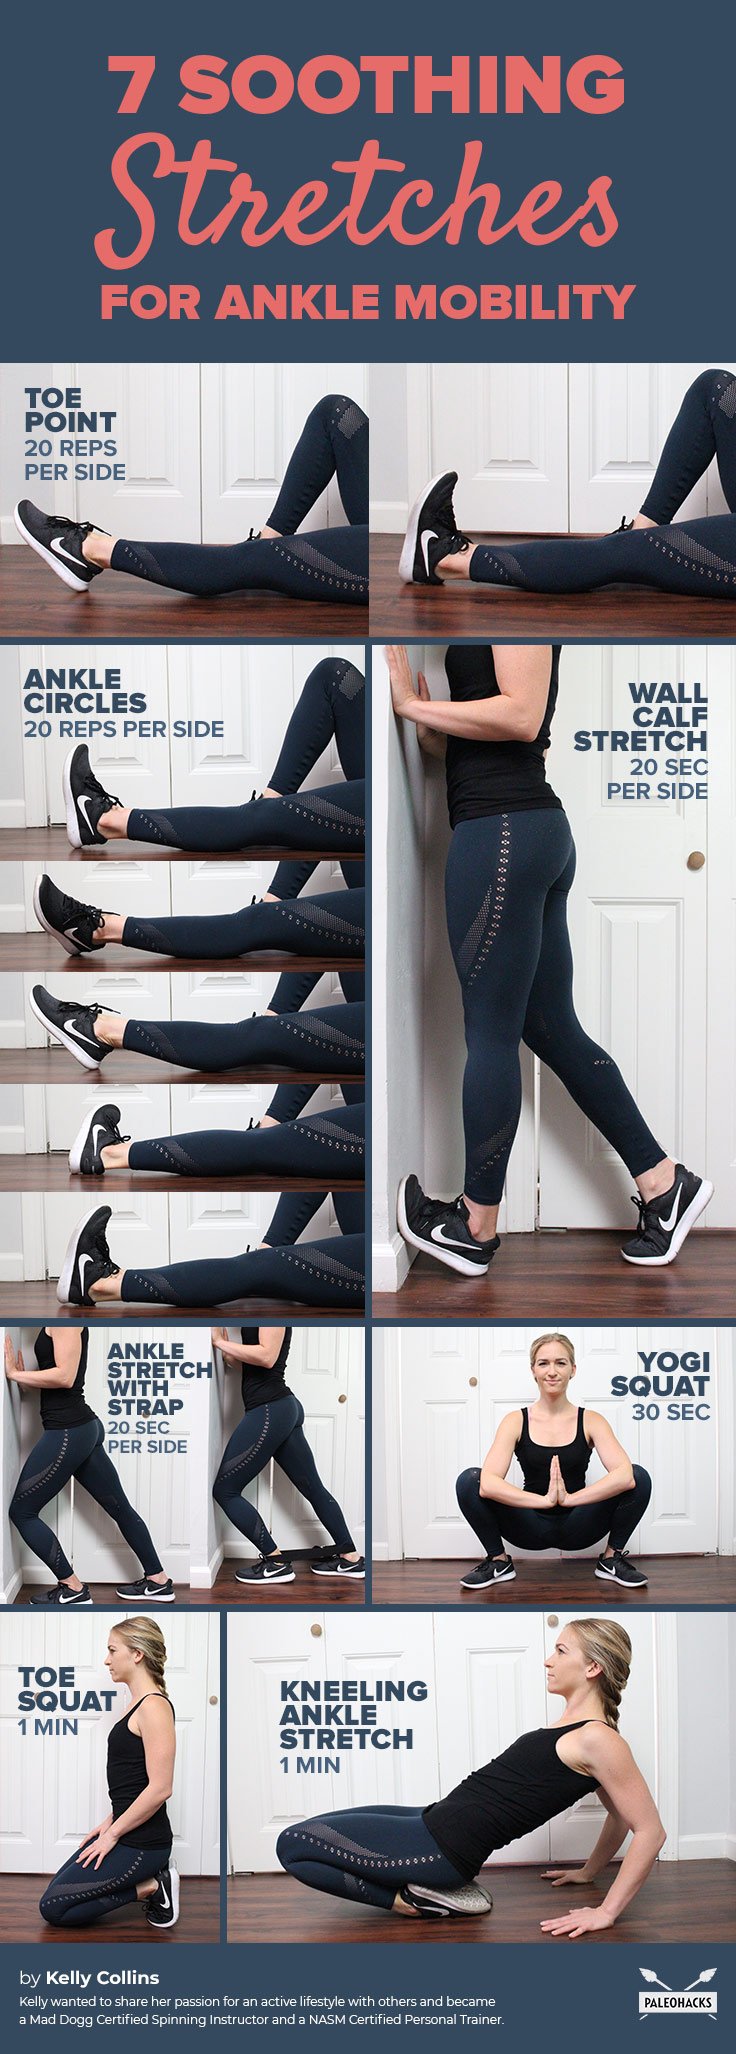 Wearing heels, sitting all day, and poor posture can all lead to stiff ankles. Reverse the damage and regain mobility in those joints with these seven ankle stretches.